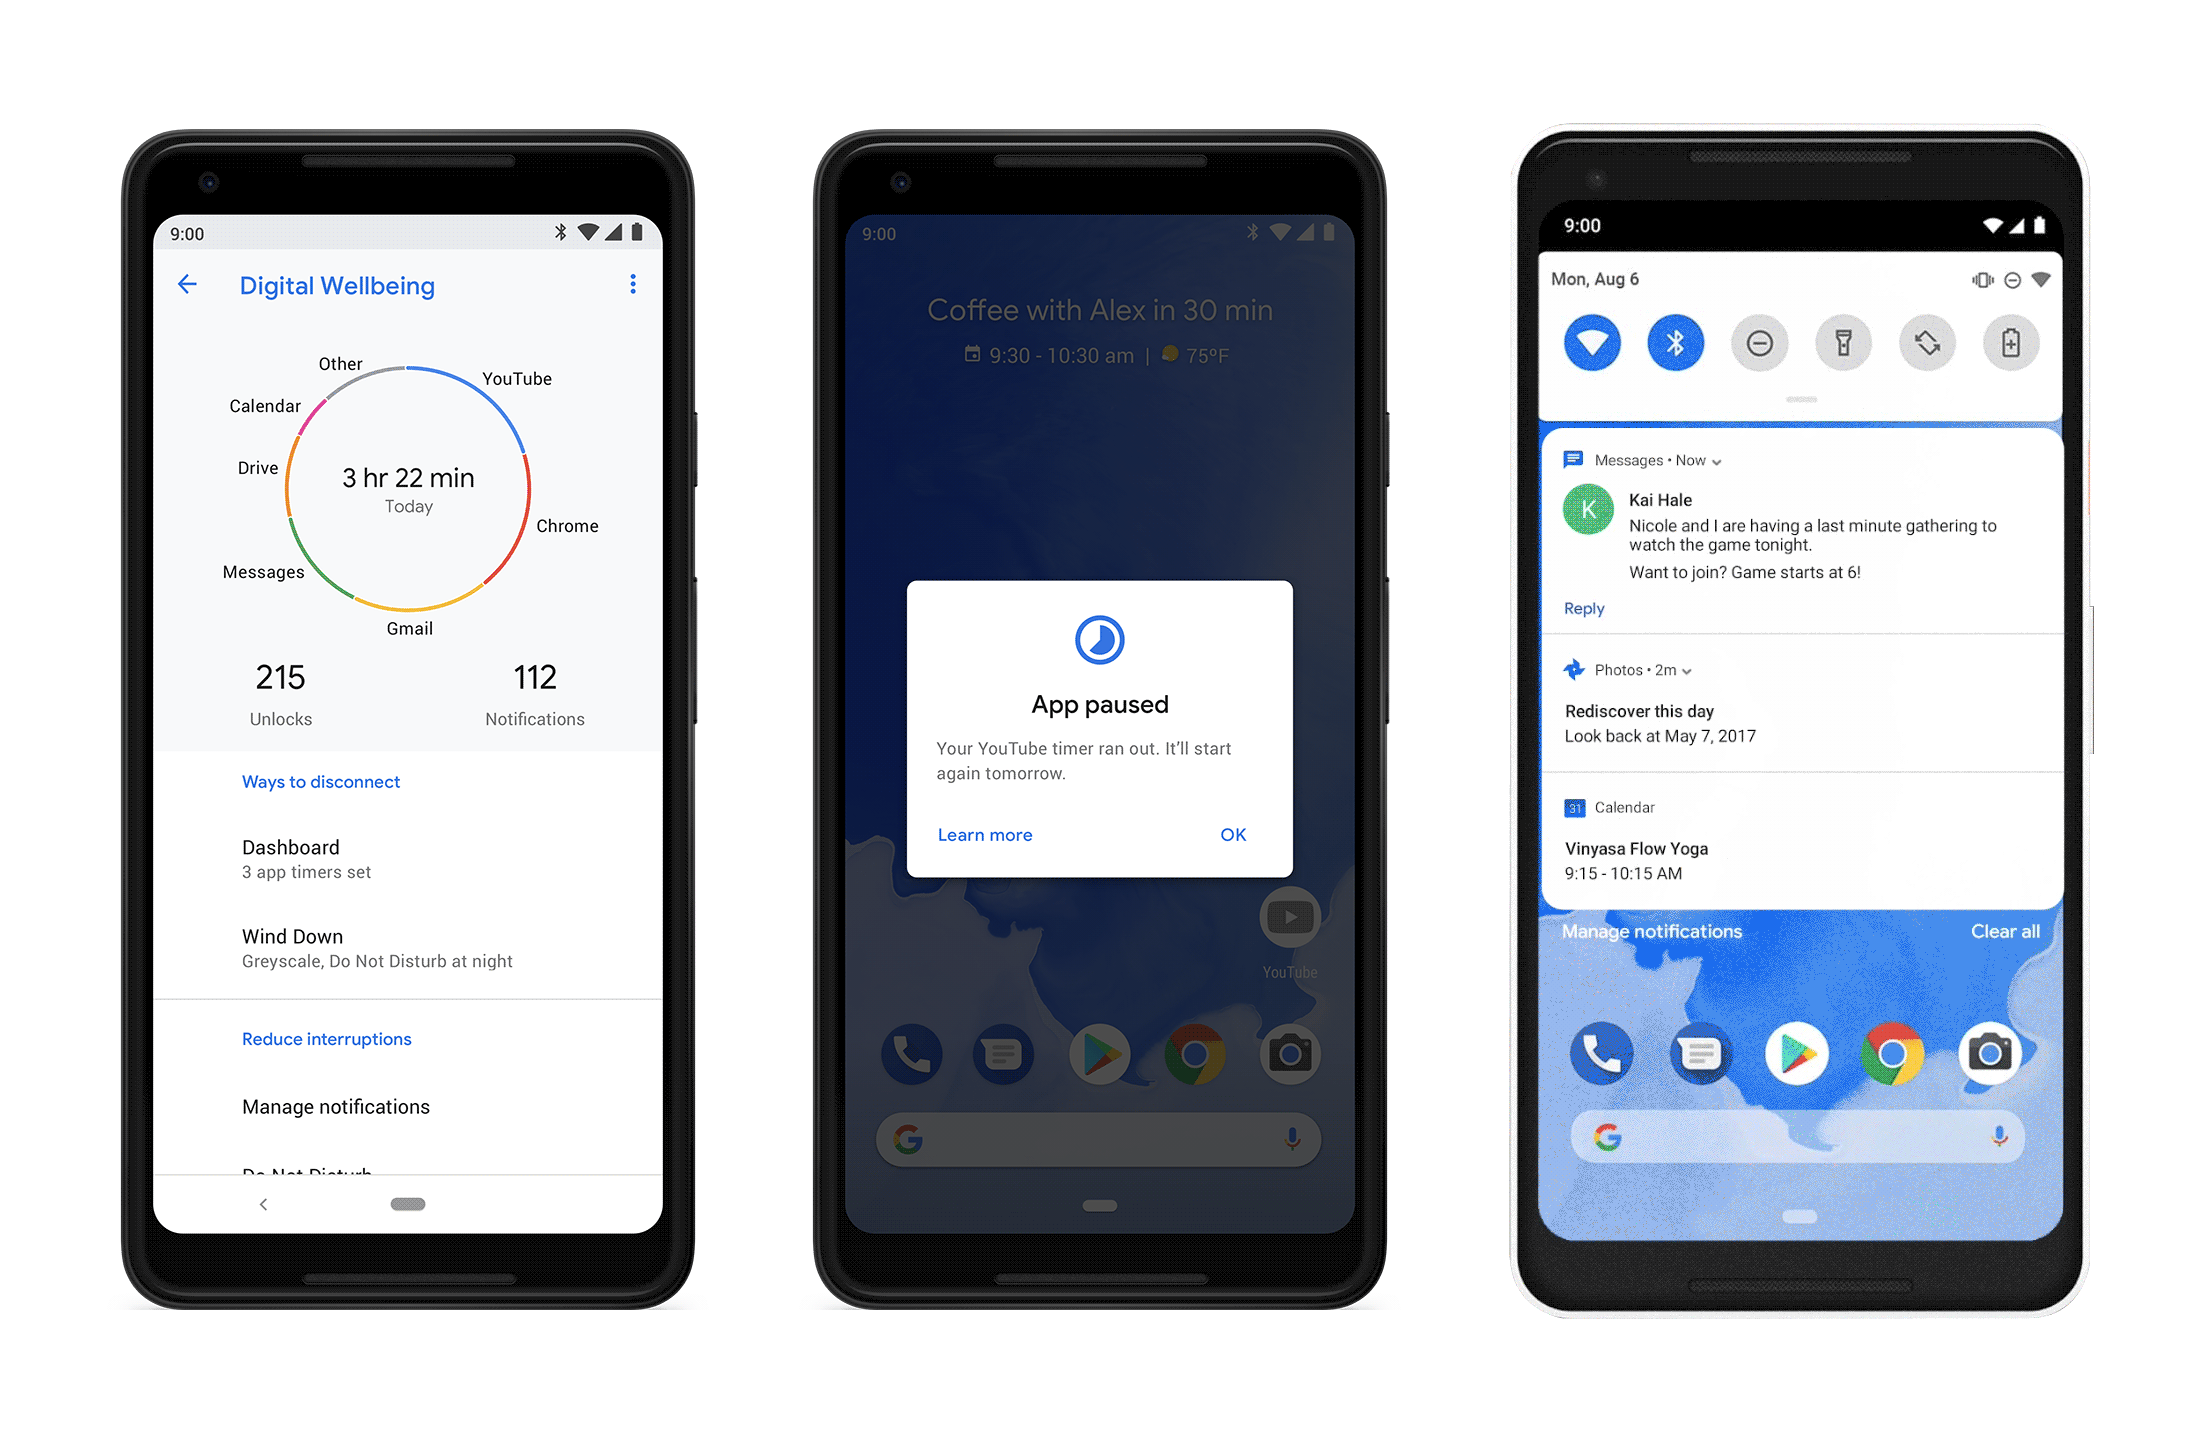 Android P Digital Wellbeing